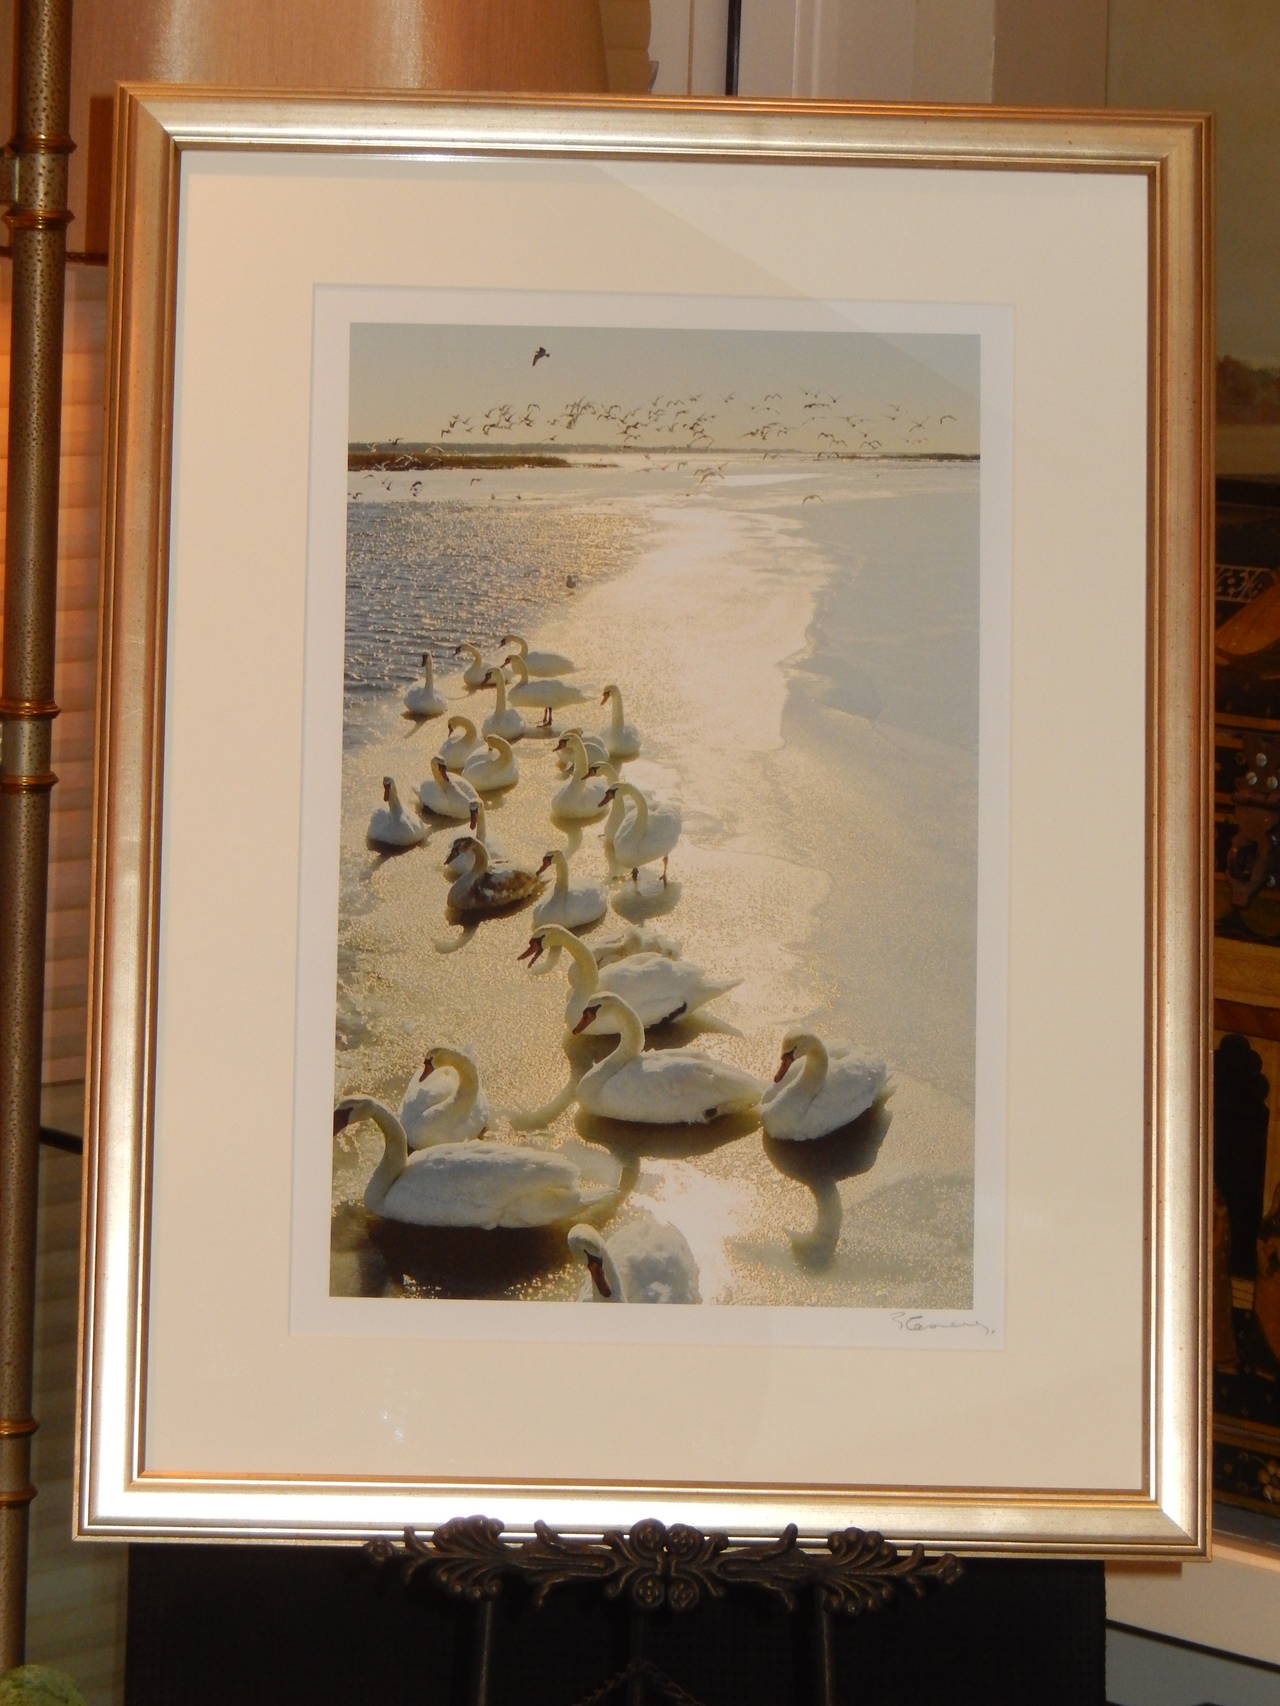 A swan ballet by renowned Photographer Patrice Casanova. Limited addition of 20 images. Image size 12 x 17, framed 18 x 25 inches.